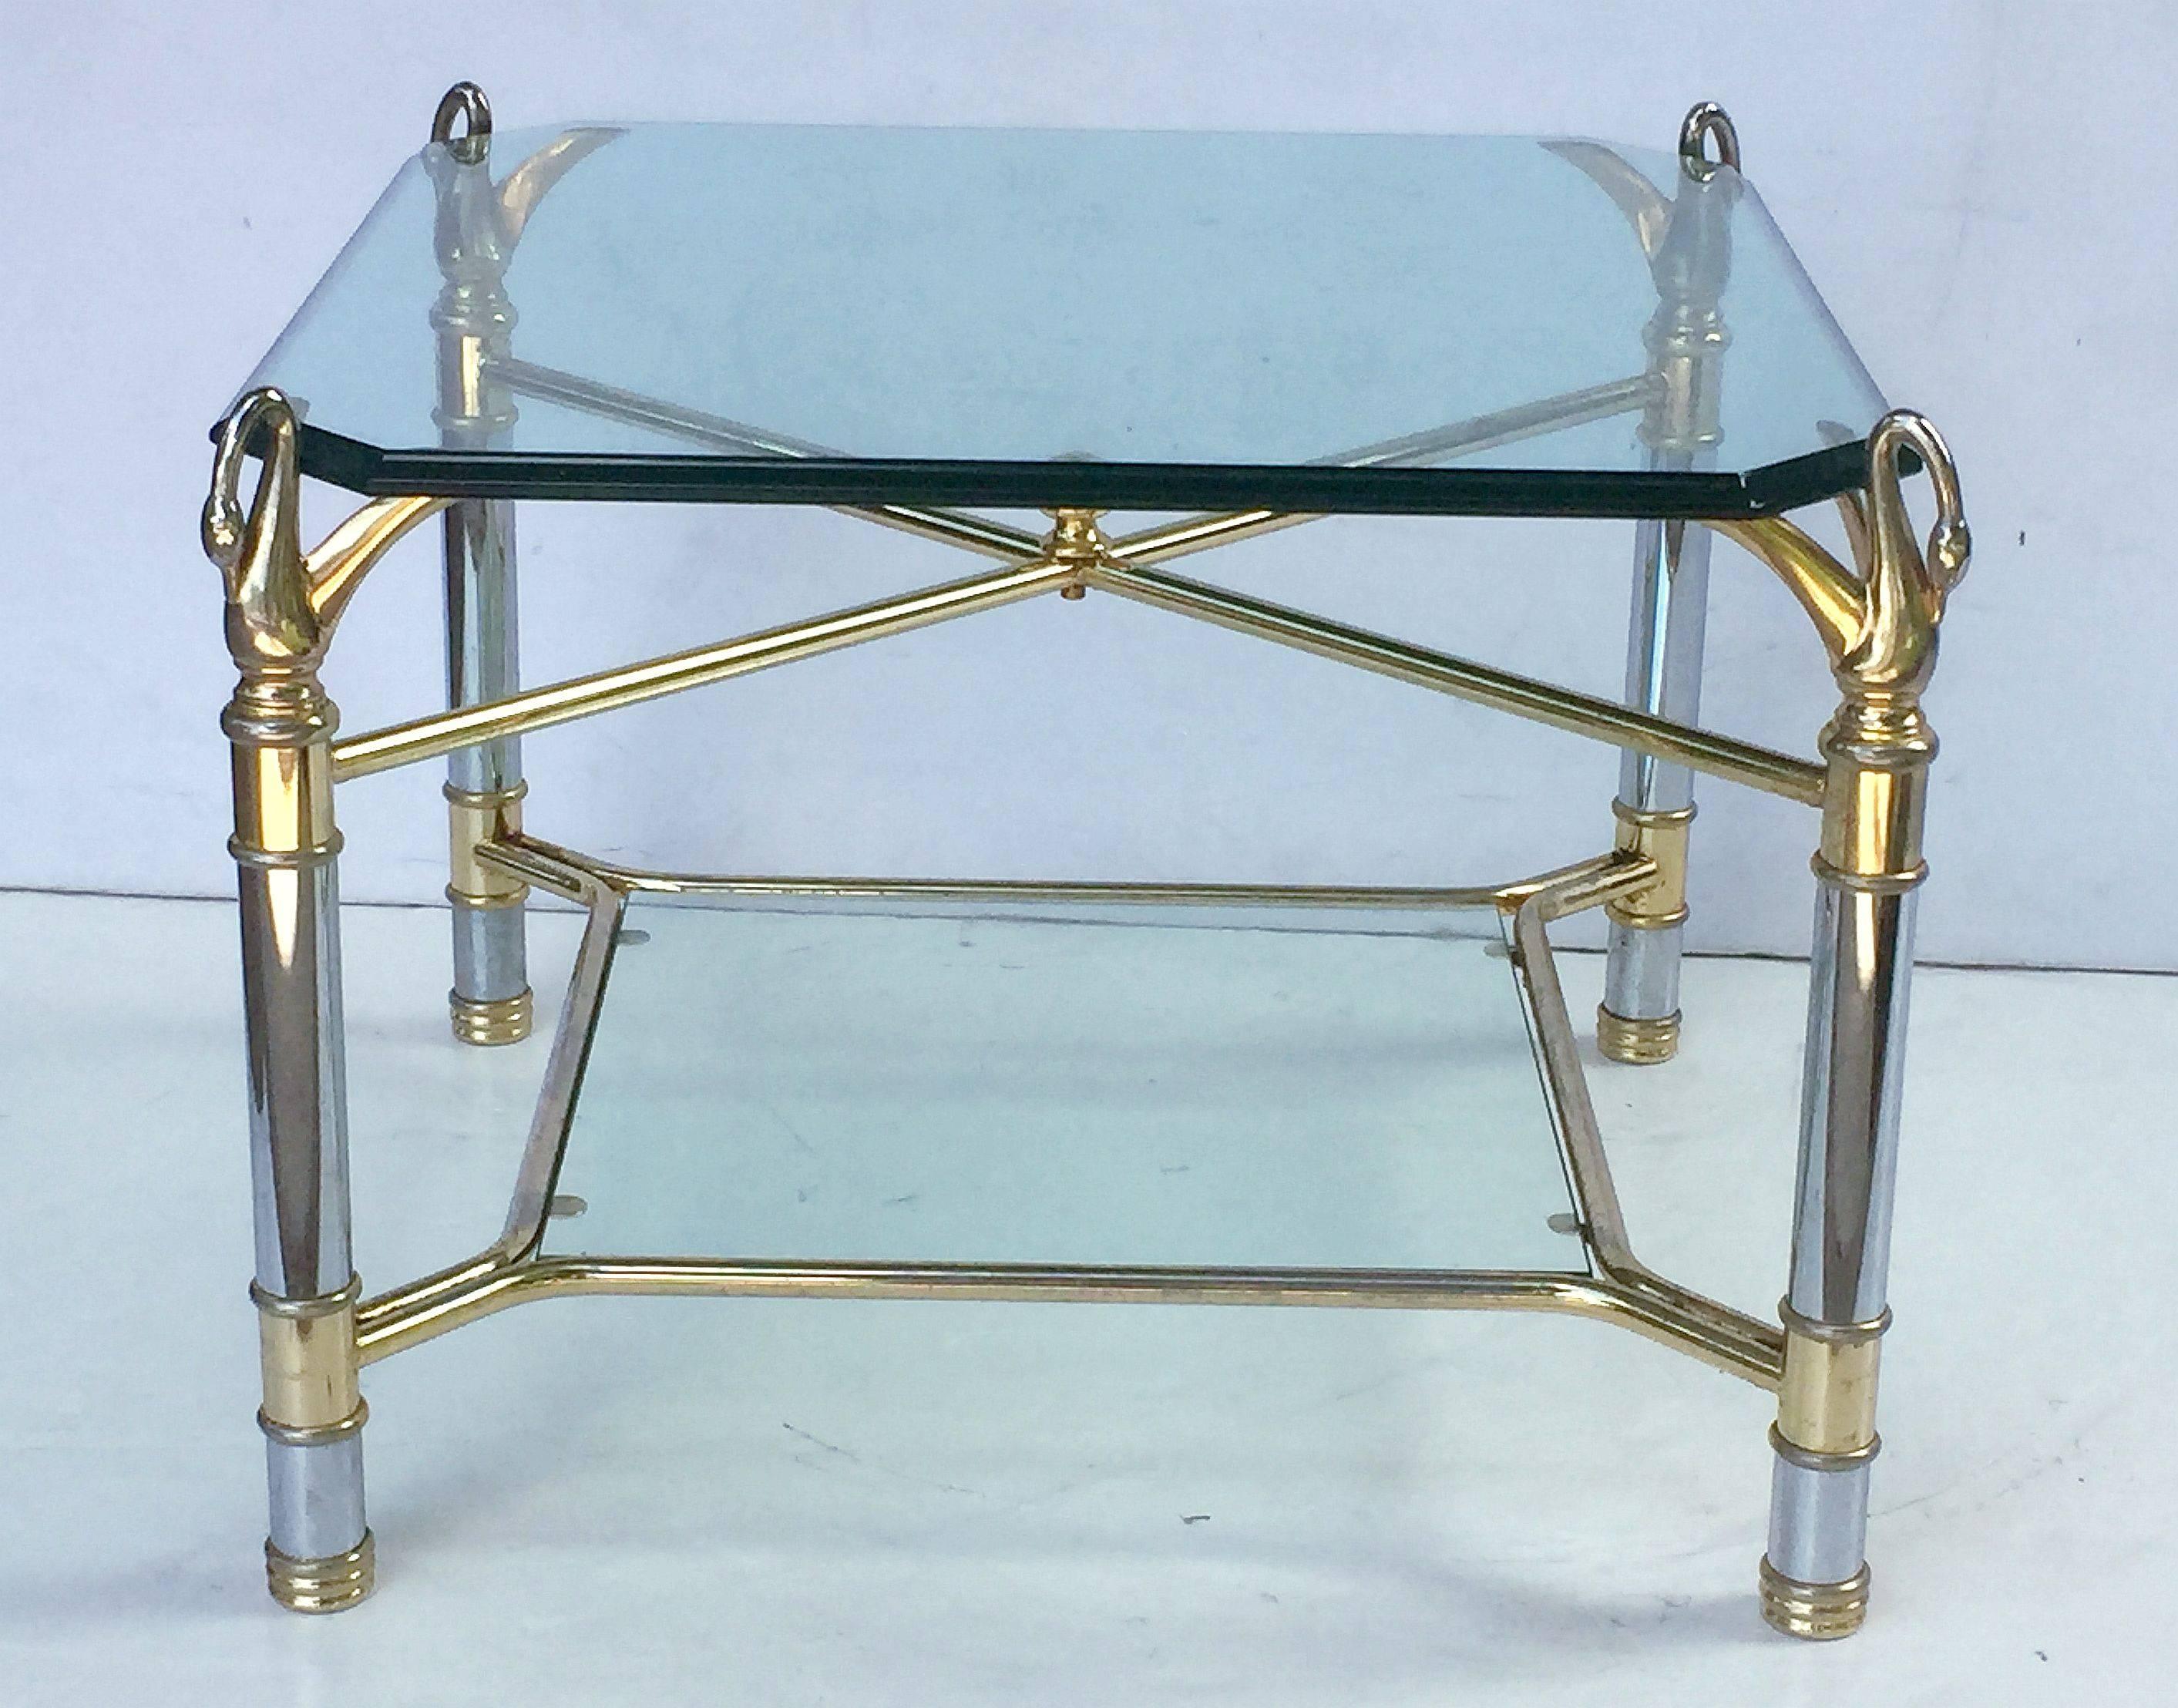 A fine French low table featuring a square canted and beveled edge clear glass top, set upon a chrome and gilt metal base with decorative swan's neck supports at each corner, with lower tier inset clear glass stretcher base.

Makes a great cocktail